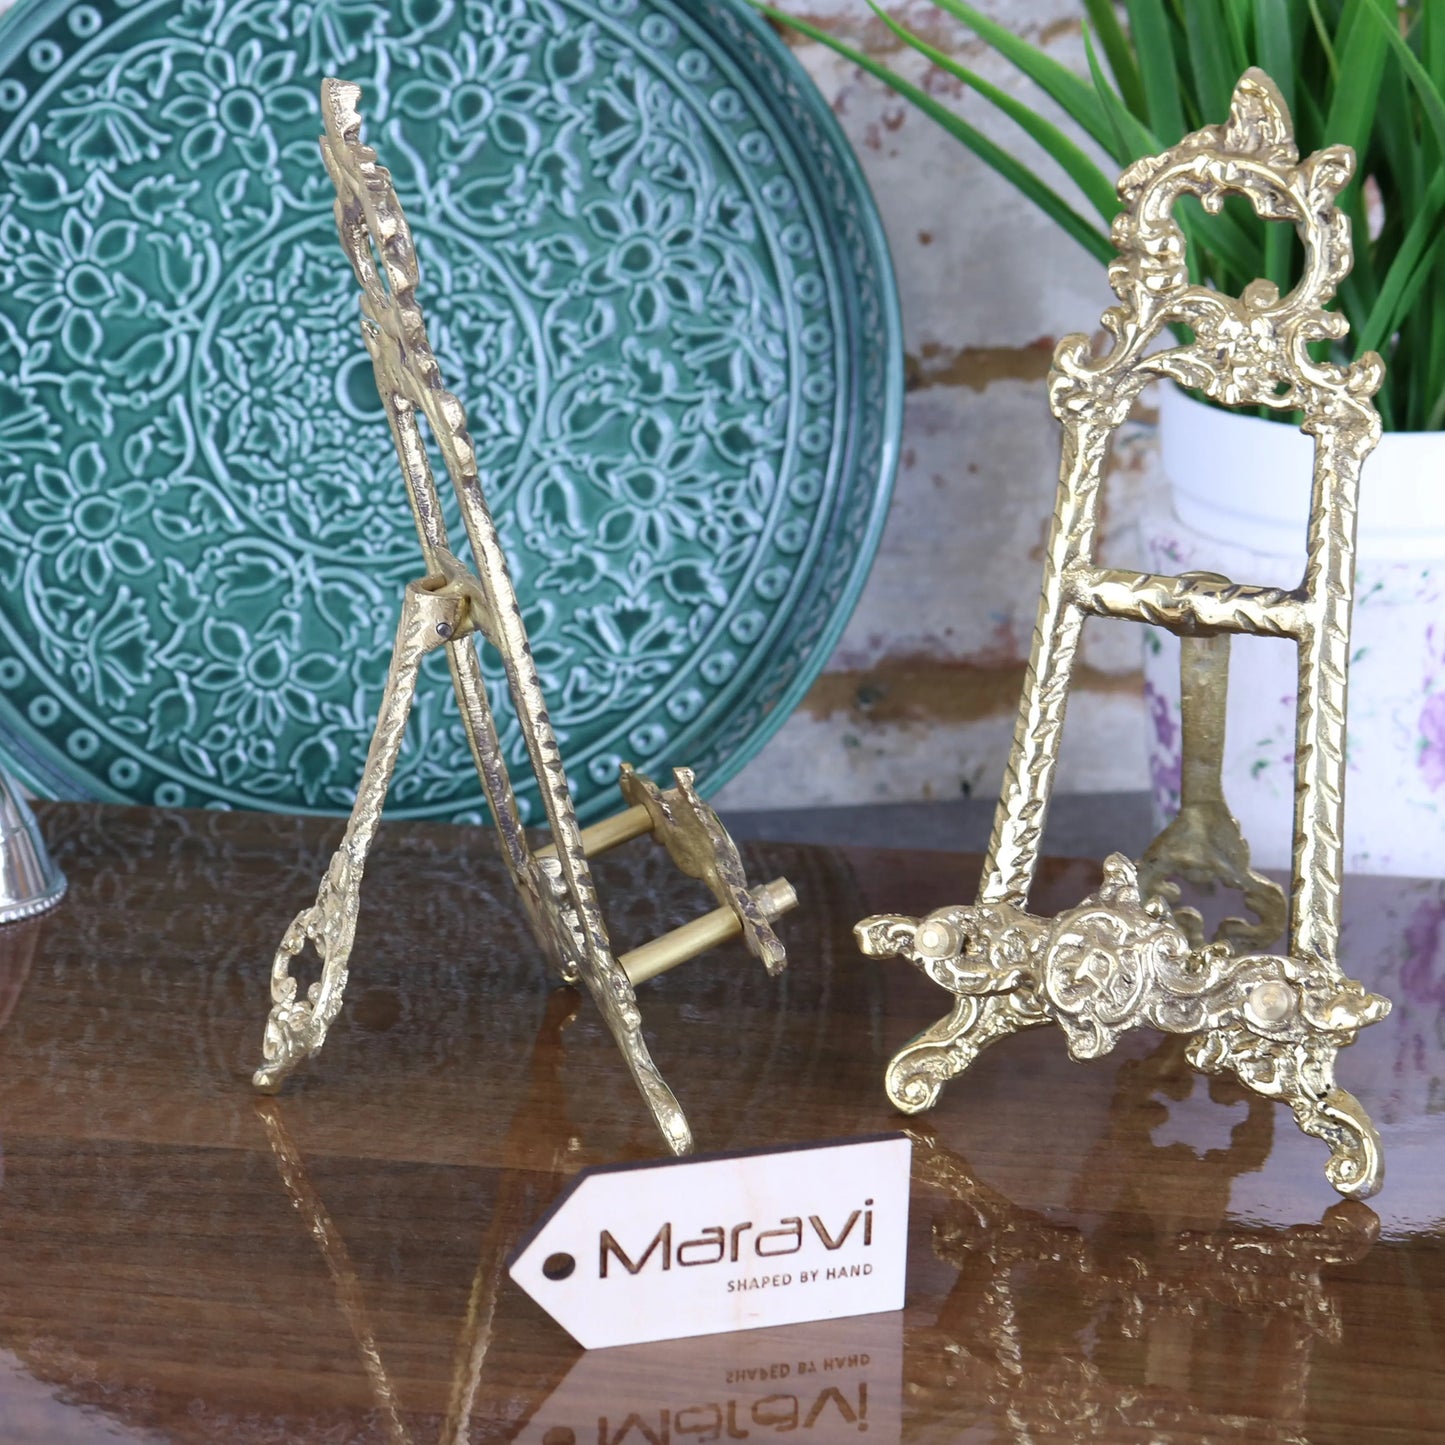 Saramati Small Decorative Brass Display Easels Side View